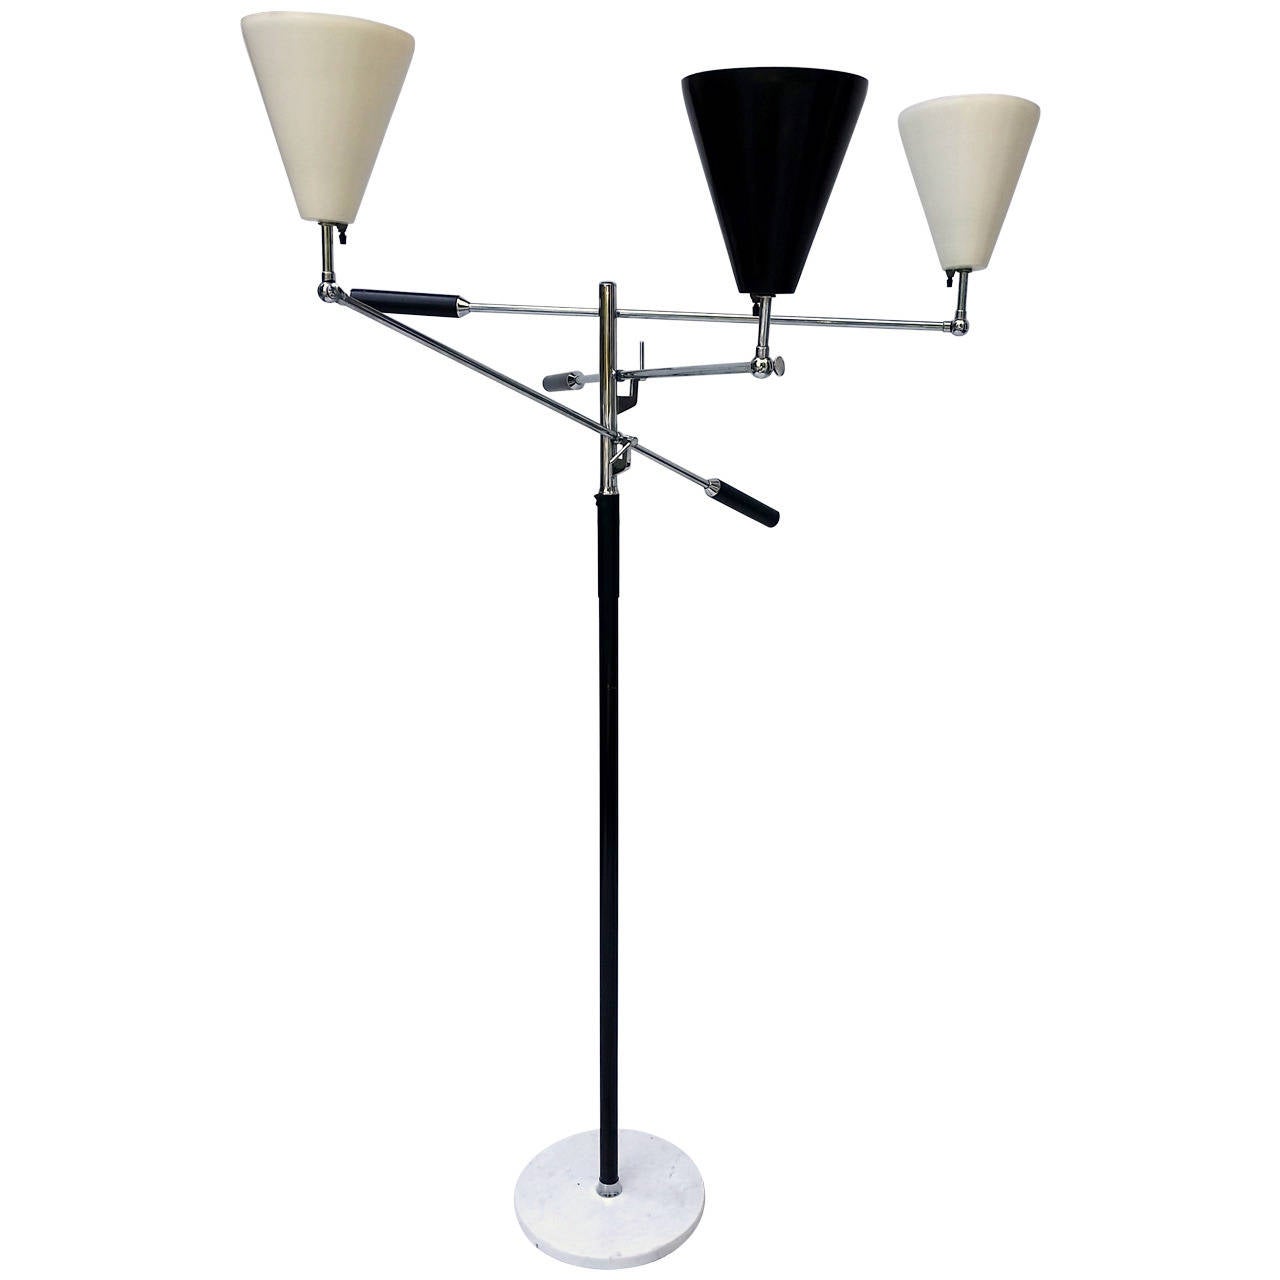 One of the classic Italian lighting designs of the 20th century designed by Angelo Lelli for Arredoluce in 1952. this lamp dates from the late 1950's. .
Leather cased handles and leather hand grip on center pole. Stamped made in Italy on the top of